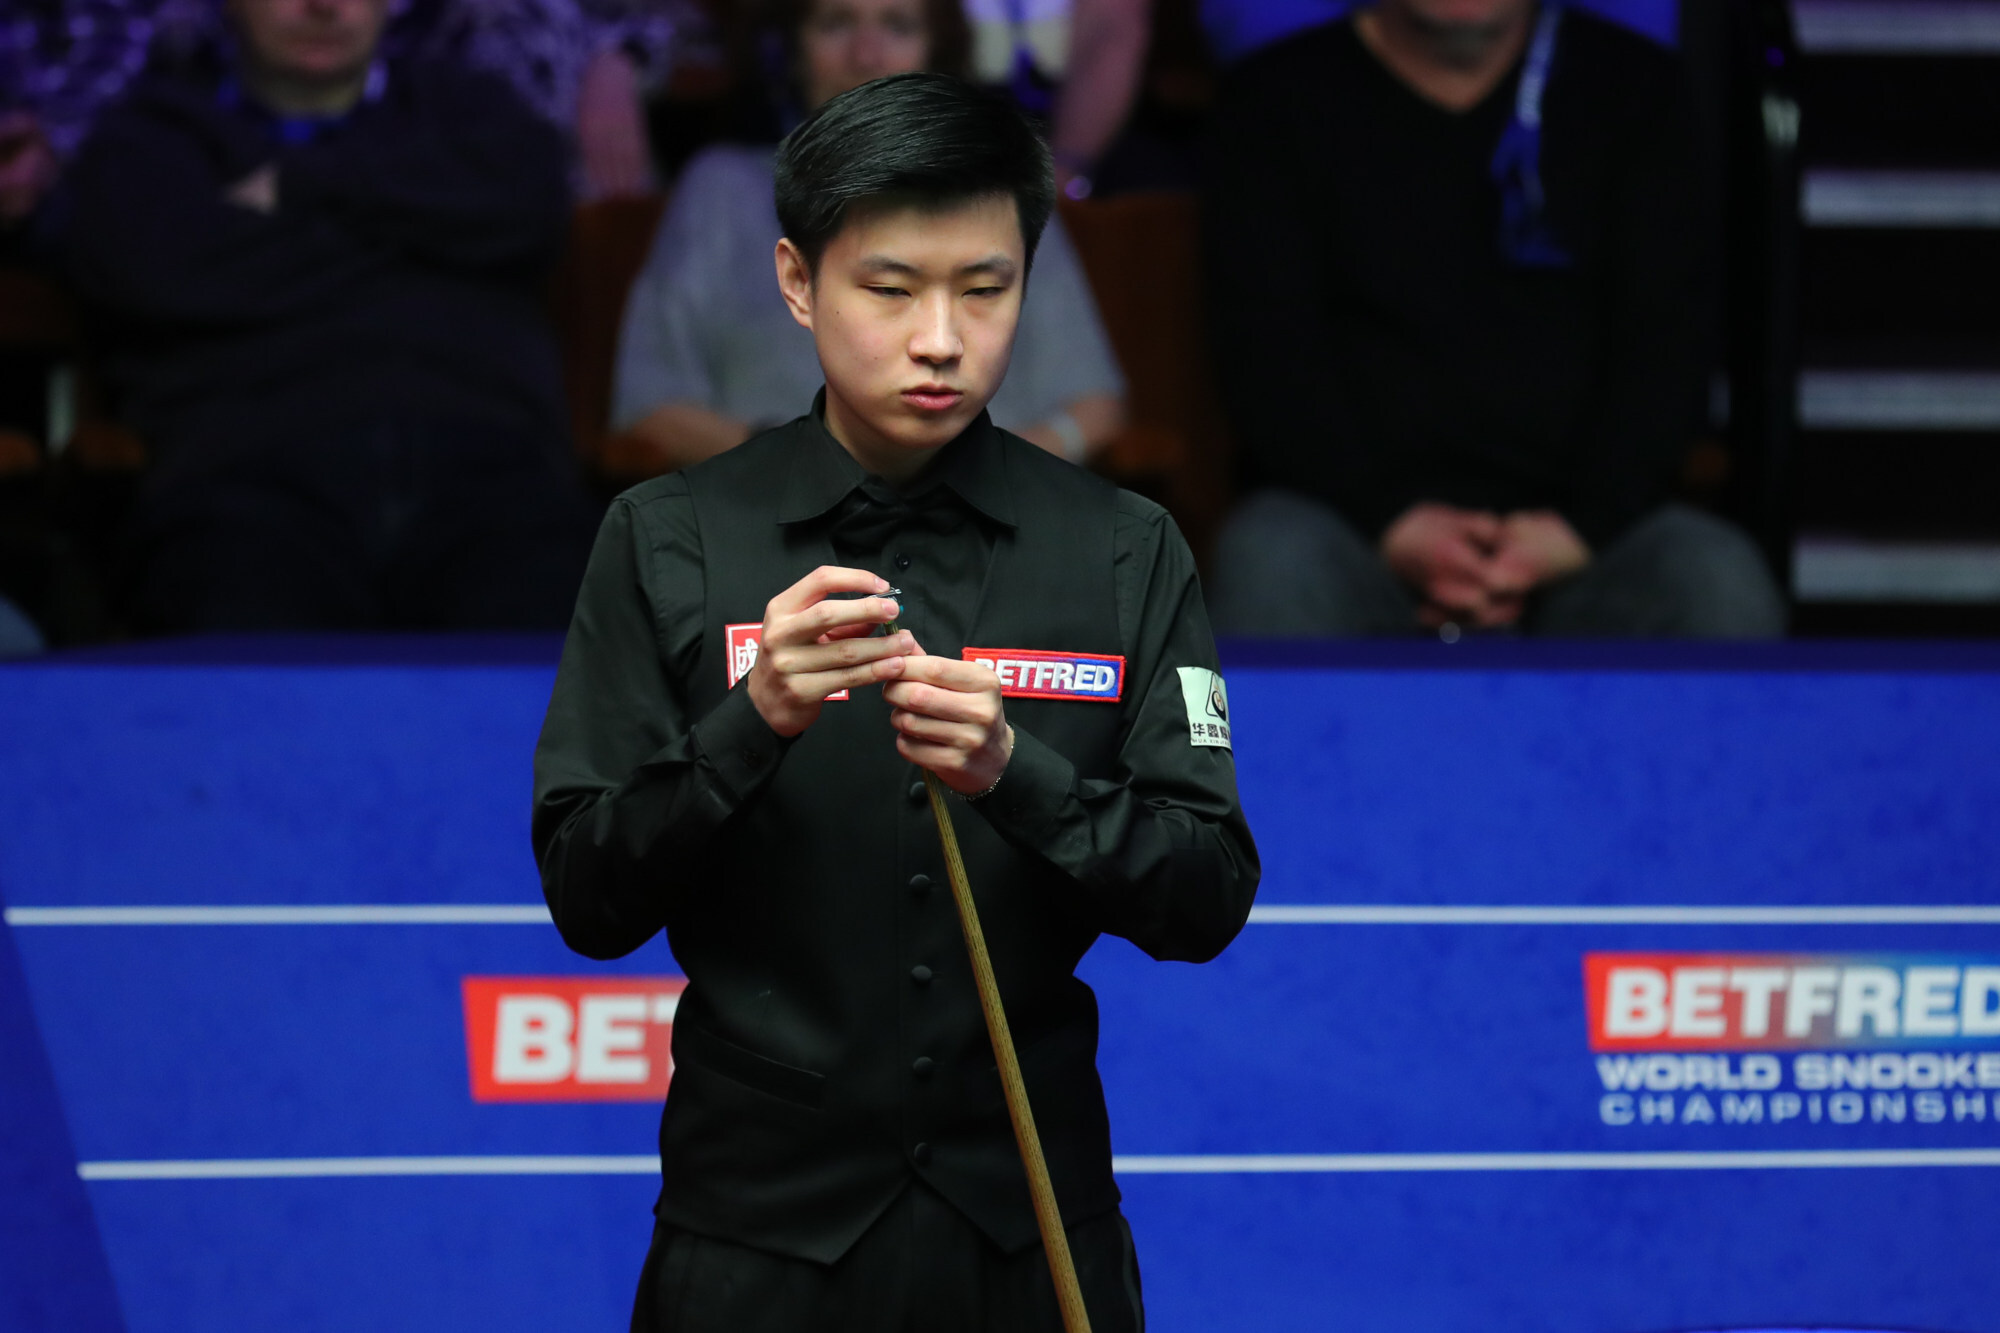 Chinas Zhao Xintong will win World Snooker Championship within five years insists Jamie Clarke after 10-2 thrashing at Crucible South China Morning Post